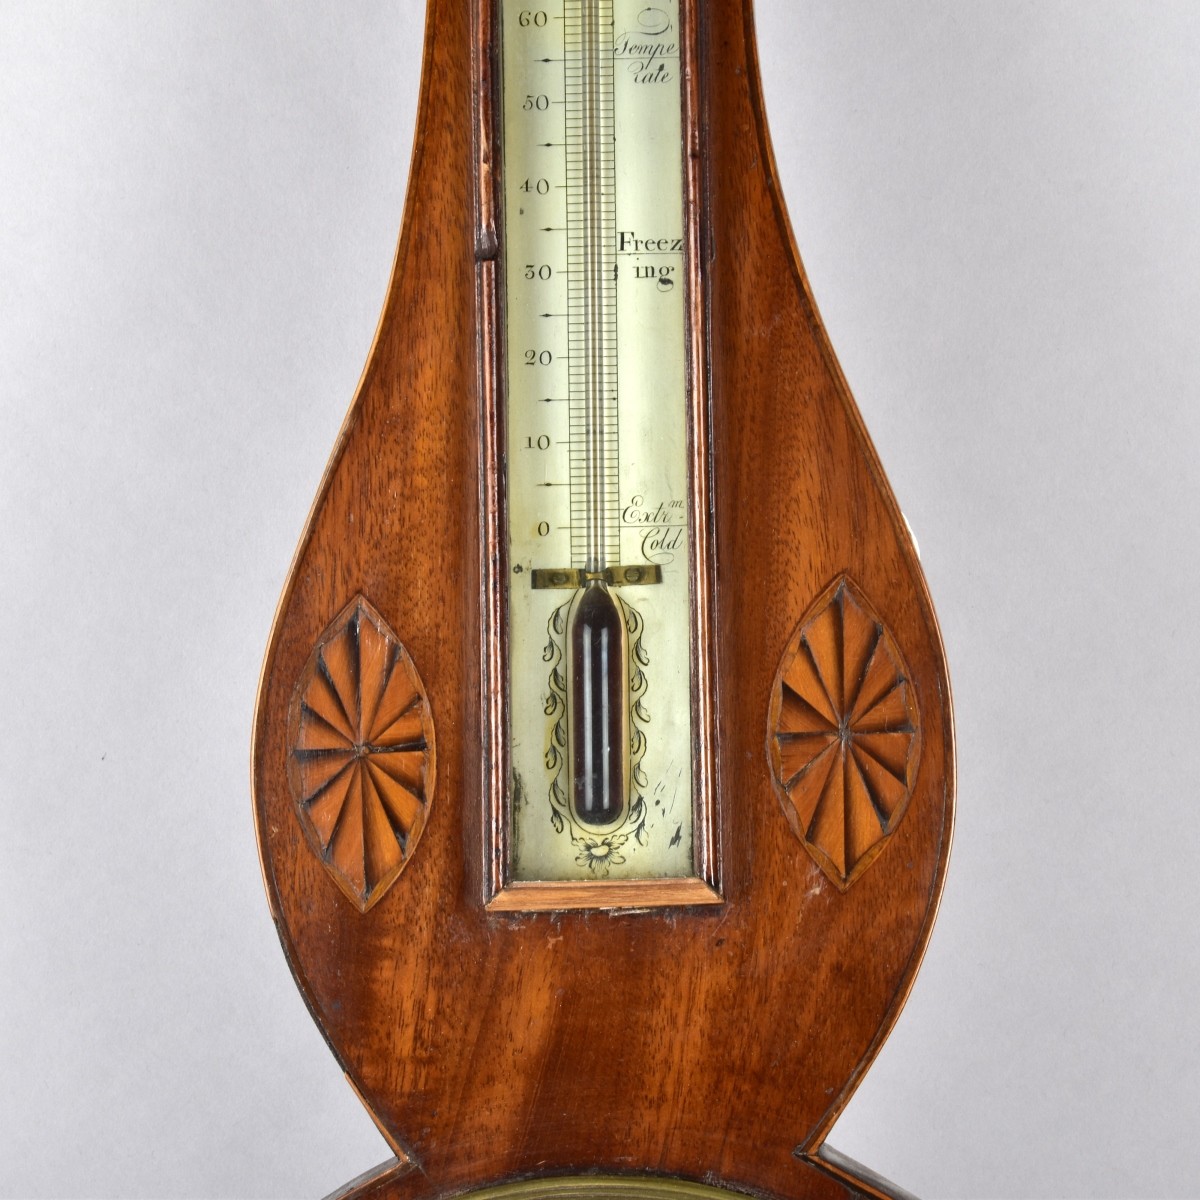 D Lione & Co. English Thermometer Barometer